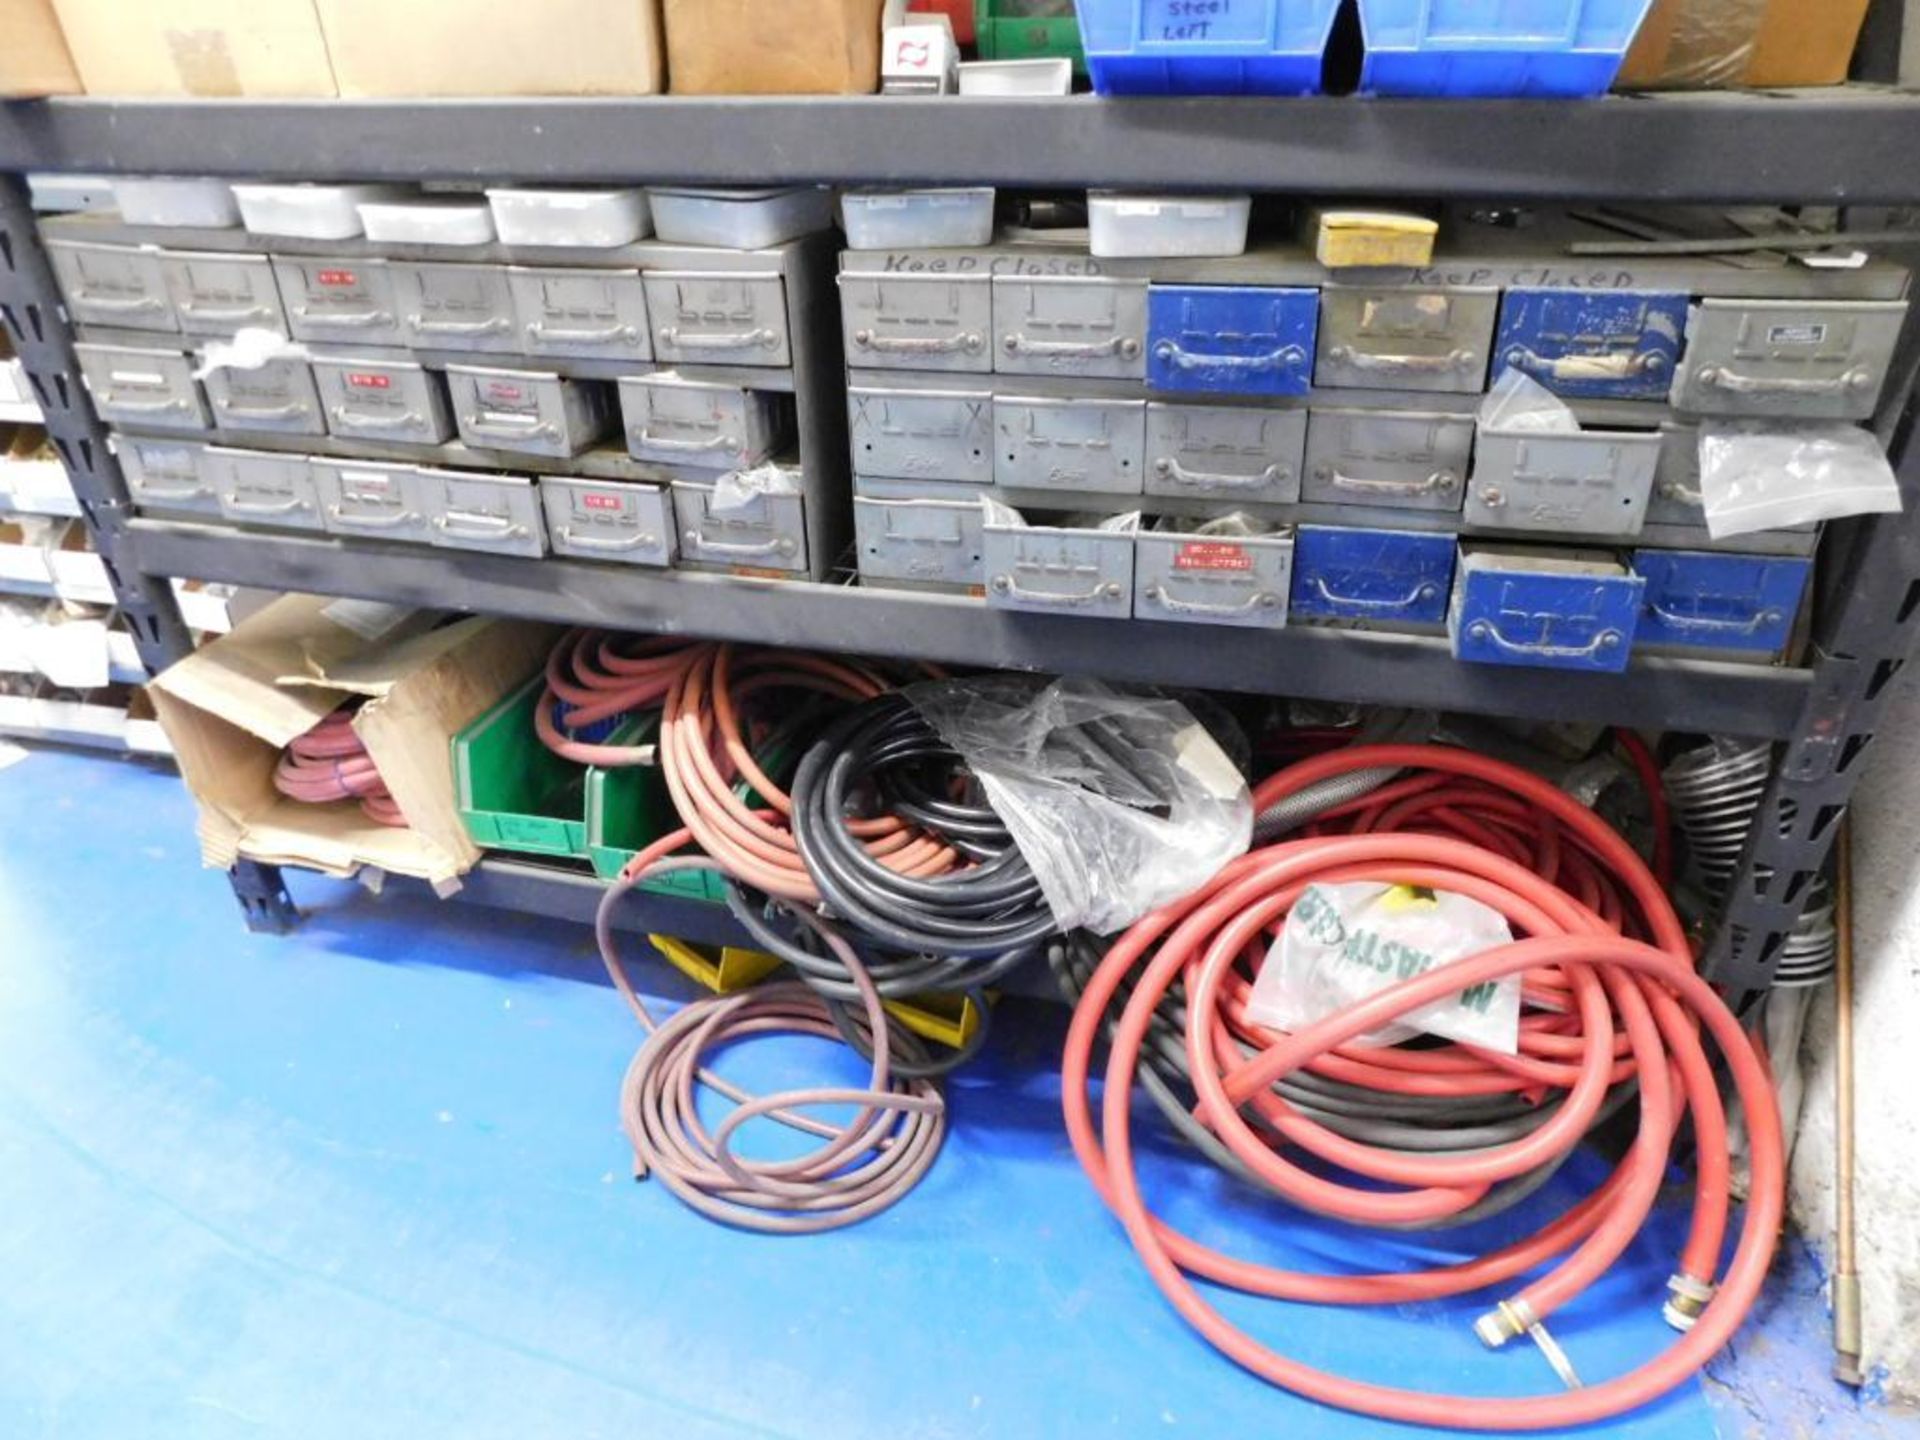 LOT: (3) Shelving Units w/Contents of Hose Hardware, PVC Fittings, etc. - Image 2 of 8